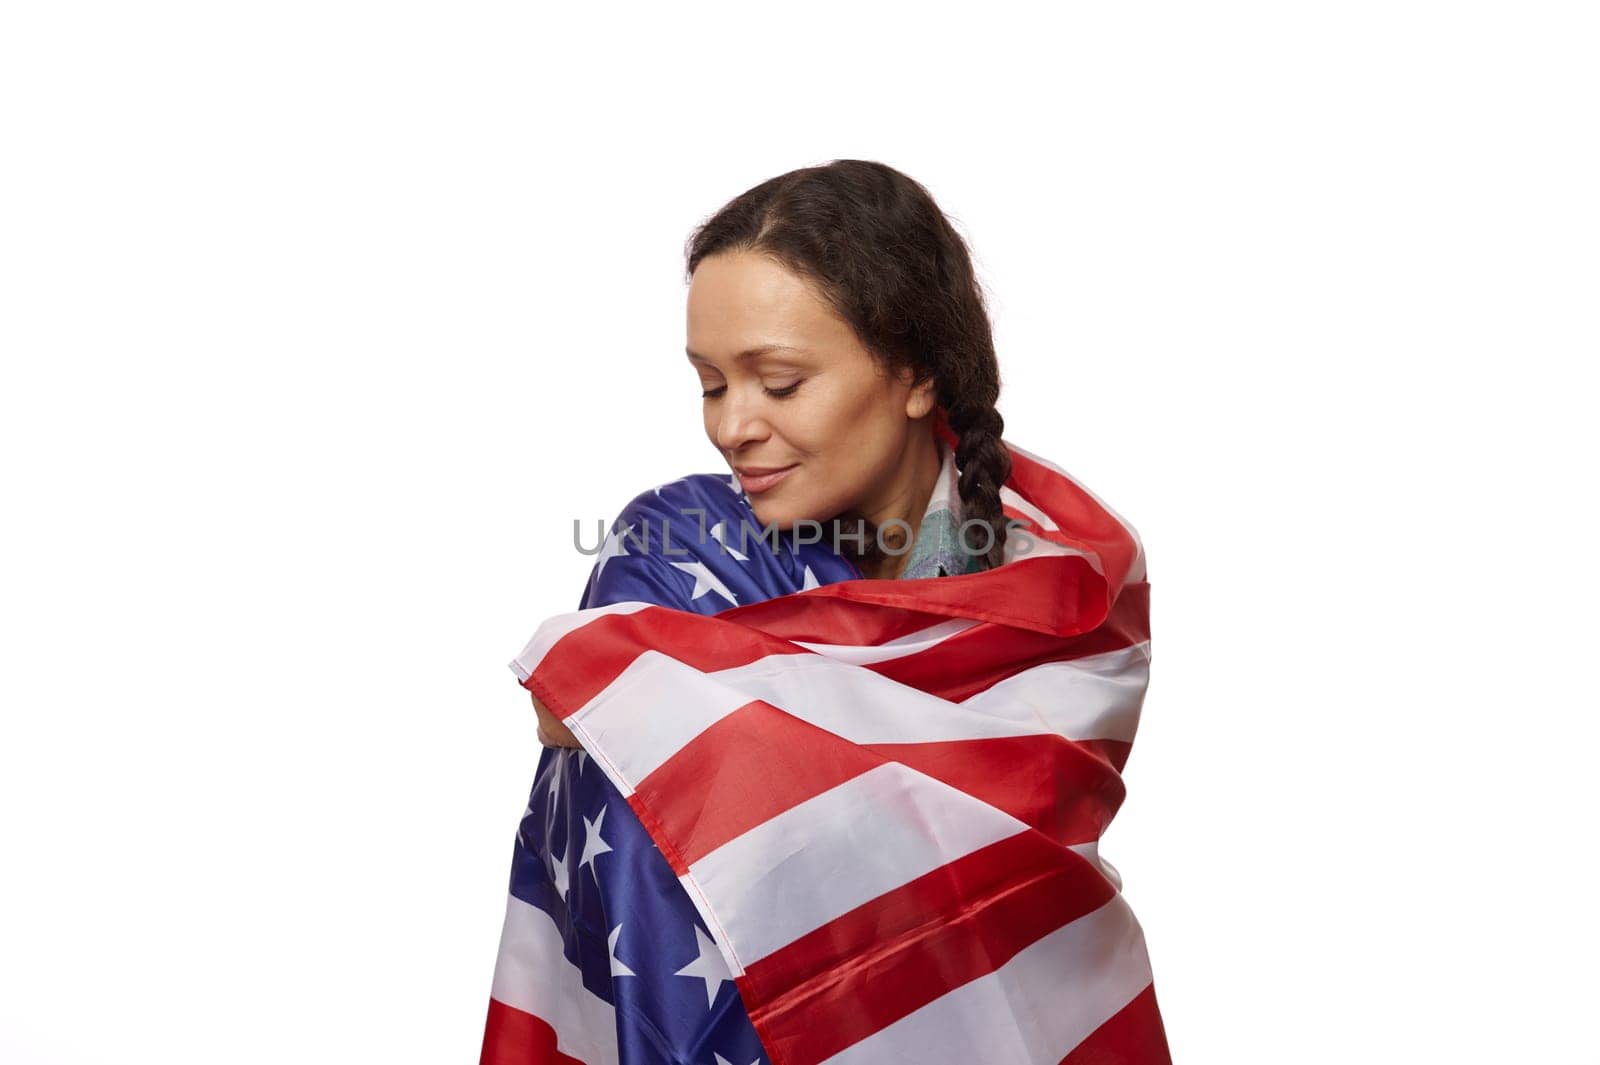 Isolated portrait on white background of a beautiful ethnic middle-aged woman, wrapped in US flag, proud to be american citizen, celebrating the independence day on July 4th. Copy advertising space